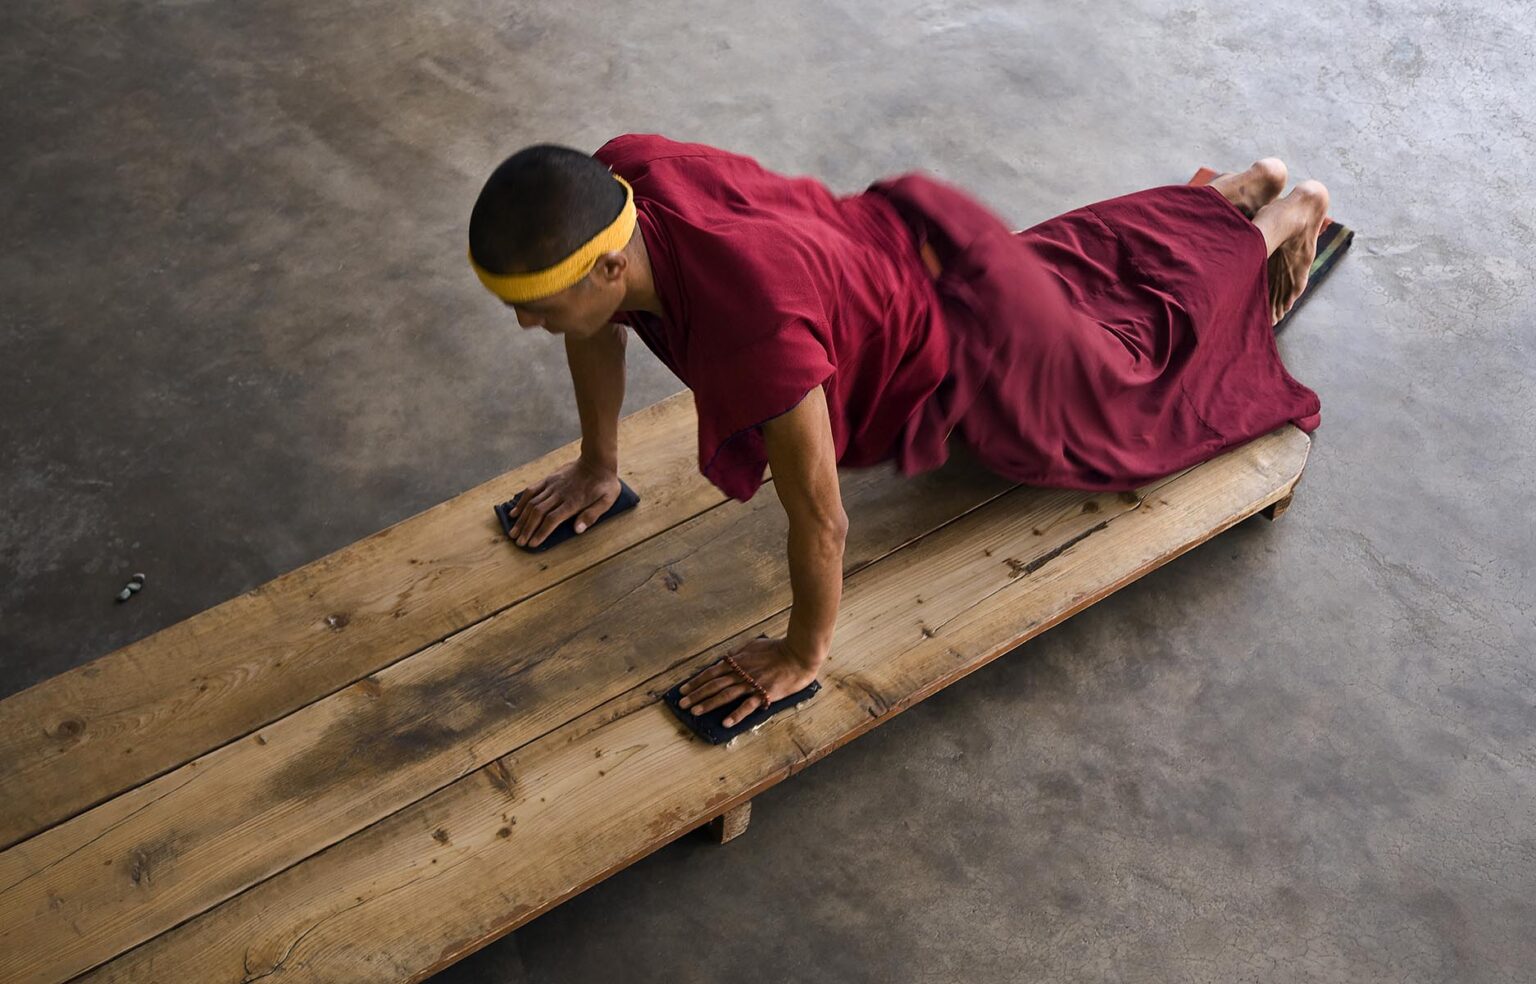 A TIBETAN MONK does prostrations at the NAMGYAL GOMPA or MONASTERY which is a GALUKPA SECT INSTITUTION of the 14th DALAI LAMA in MCLEOD GANG - DHARMSALA, INDIA